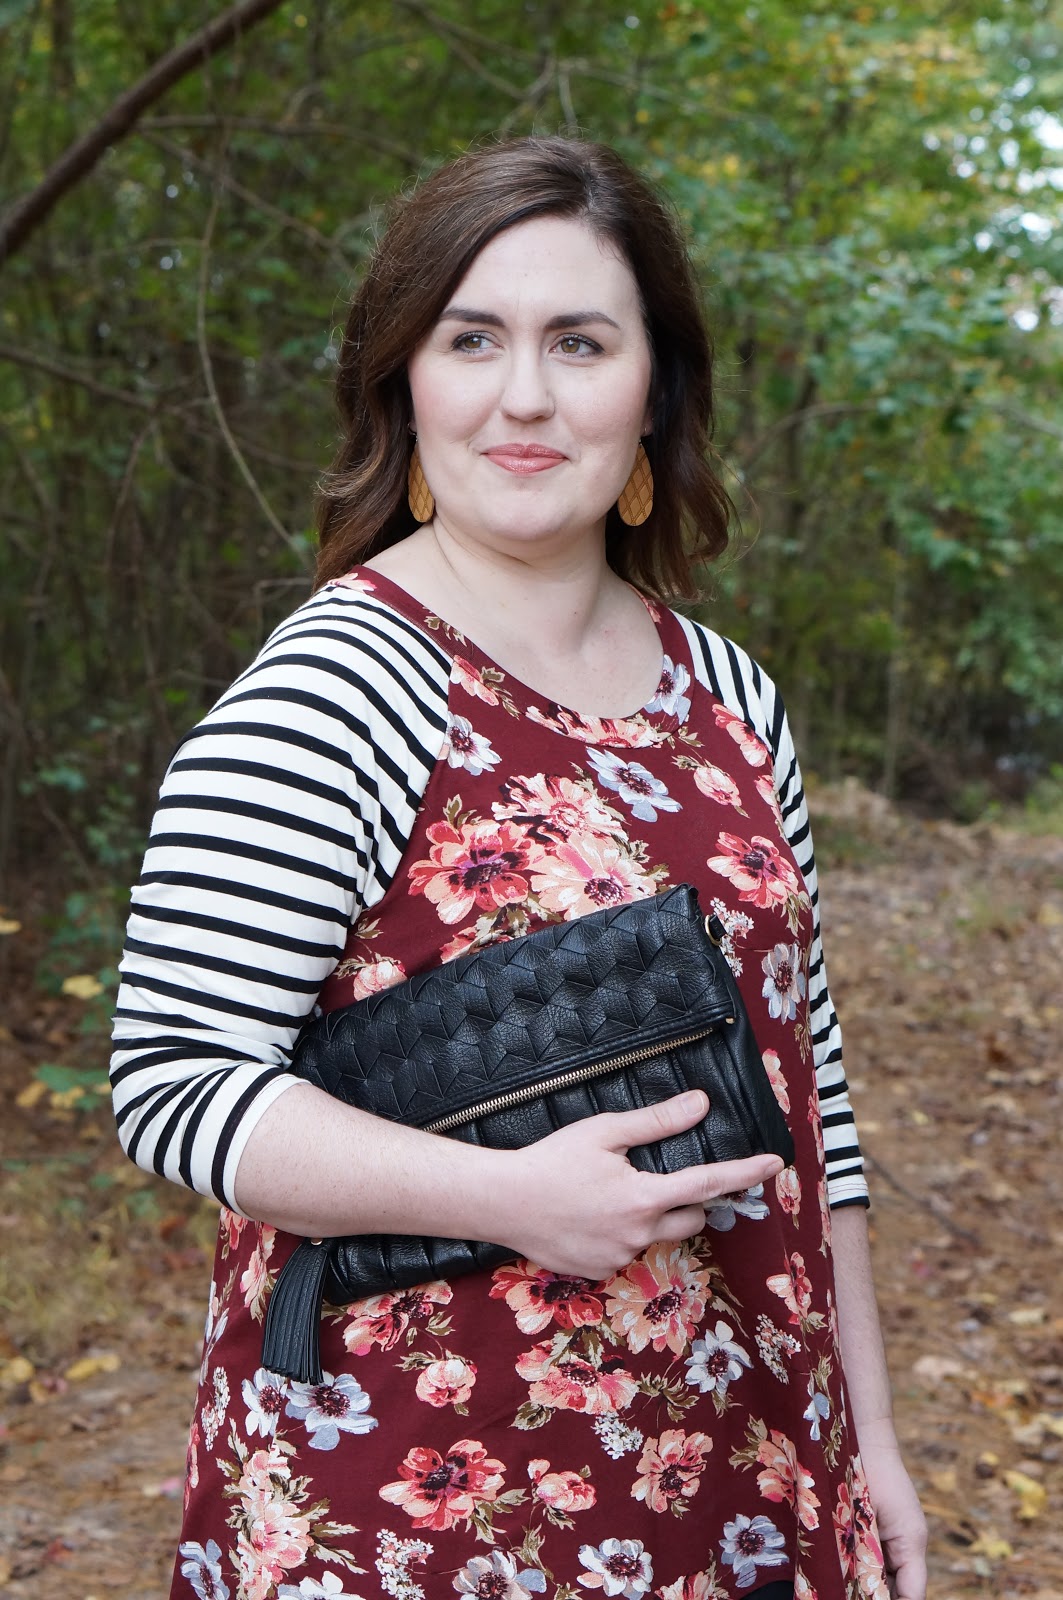 FALL STYLE FLORAL TOP | WEEKENDING THIS CHIC SOUL by North Carolina style blogger Rebecca Lately